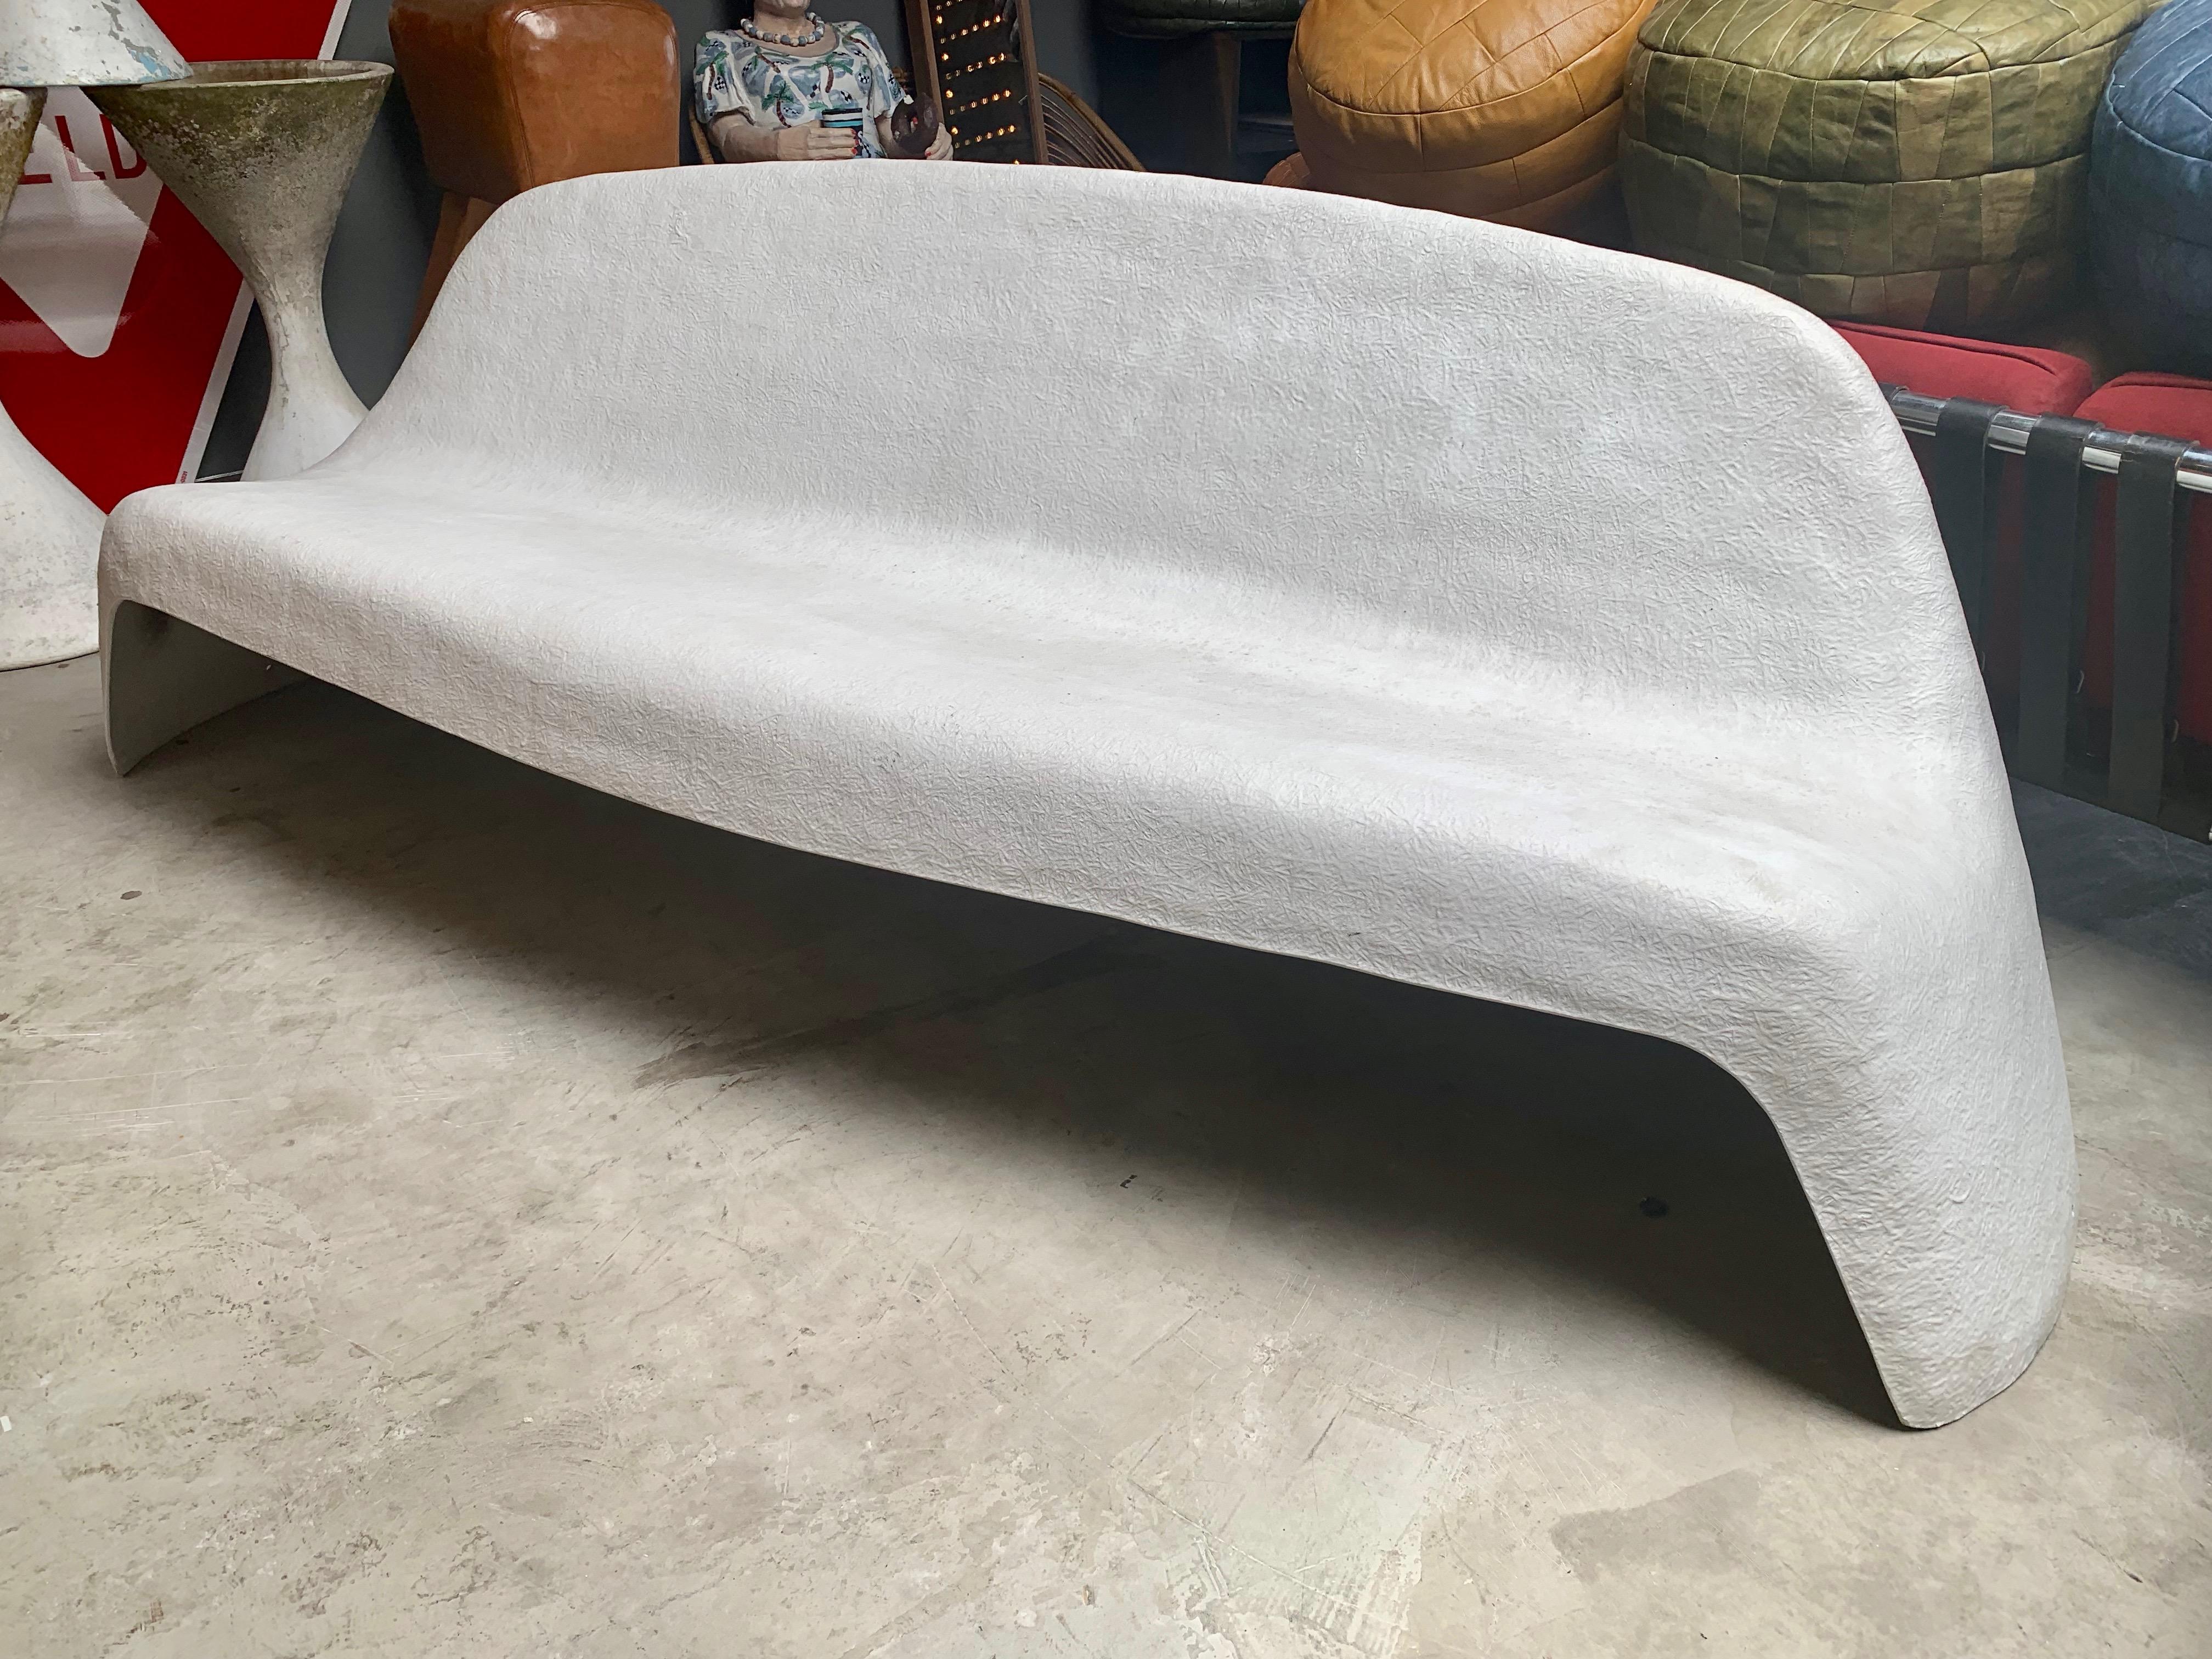 Stunning sculptural fiberglass bench by Walter Papst for Wilkhahn. Made in Germany, in the 1960s. Very rare design. Single piece of fiberglass sculpted with great lines from all angles. Made for the outdoors. Also beautiful inside. Looks like a